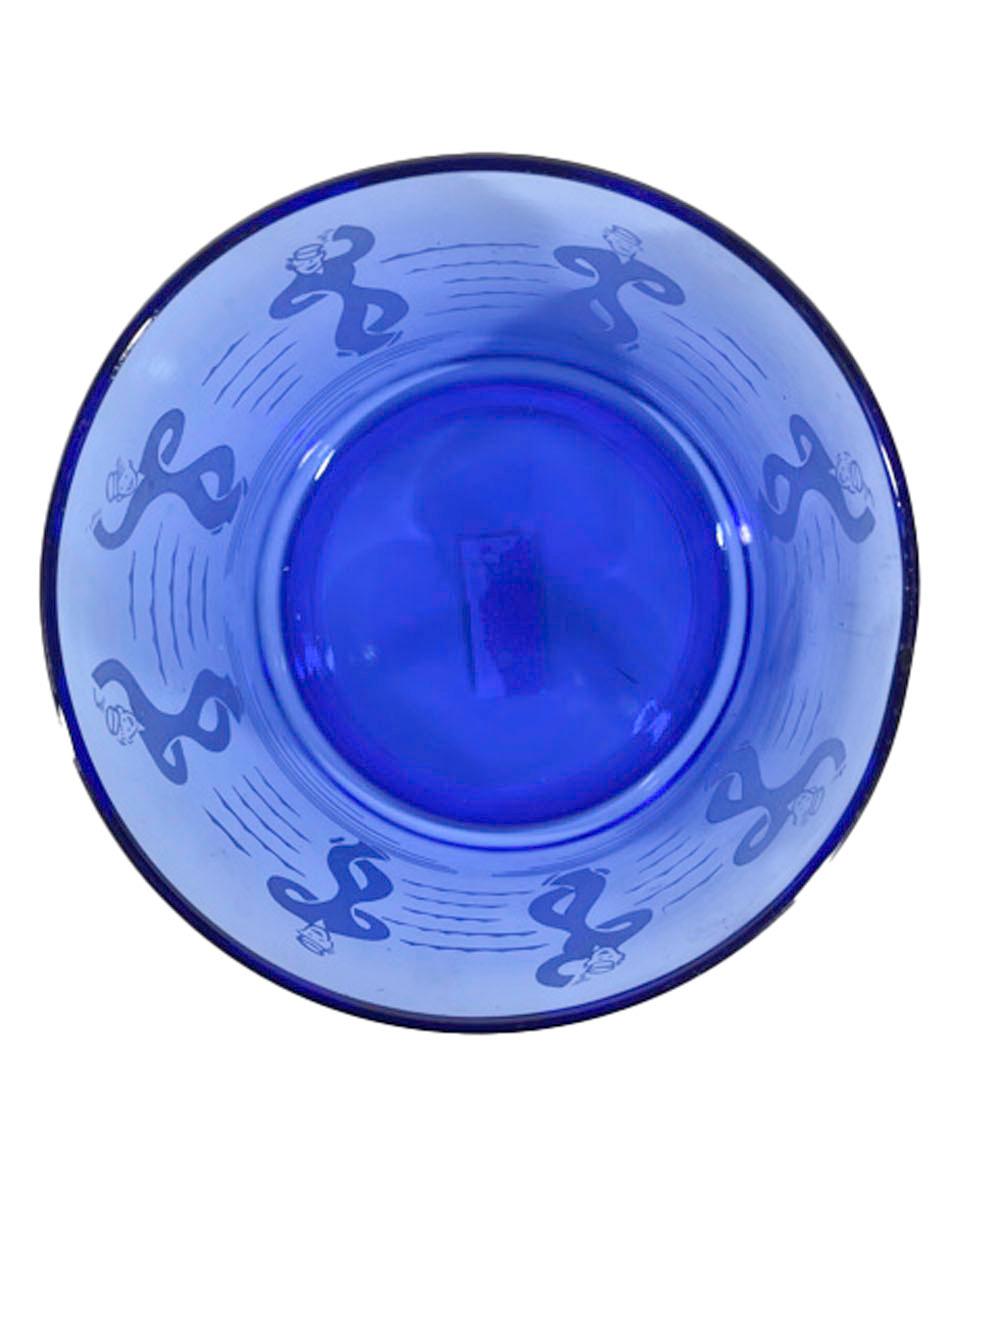 American Hazel Atlas White on Cobalt Dancing Sailors Ice Bowl from the Sportsman Series For Sale